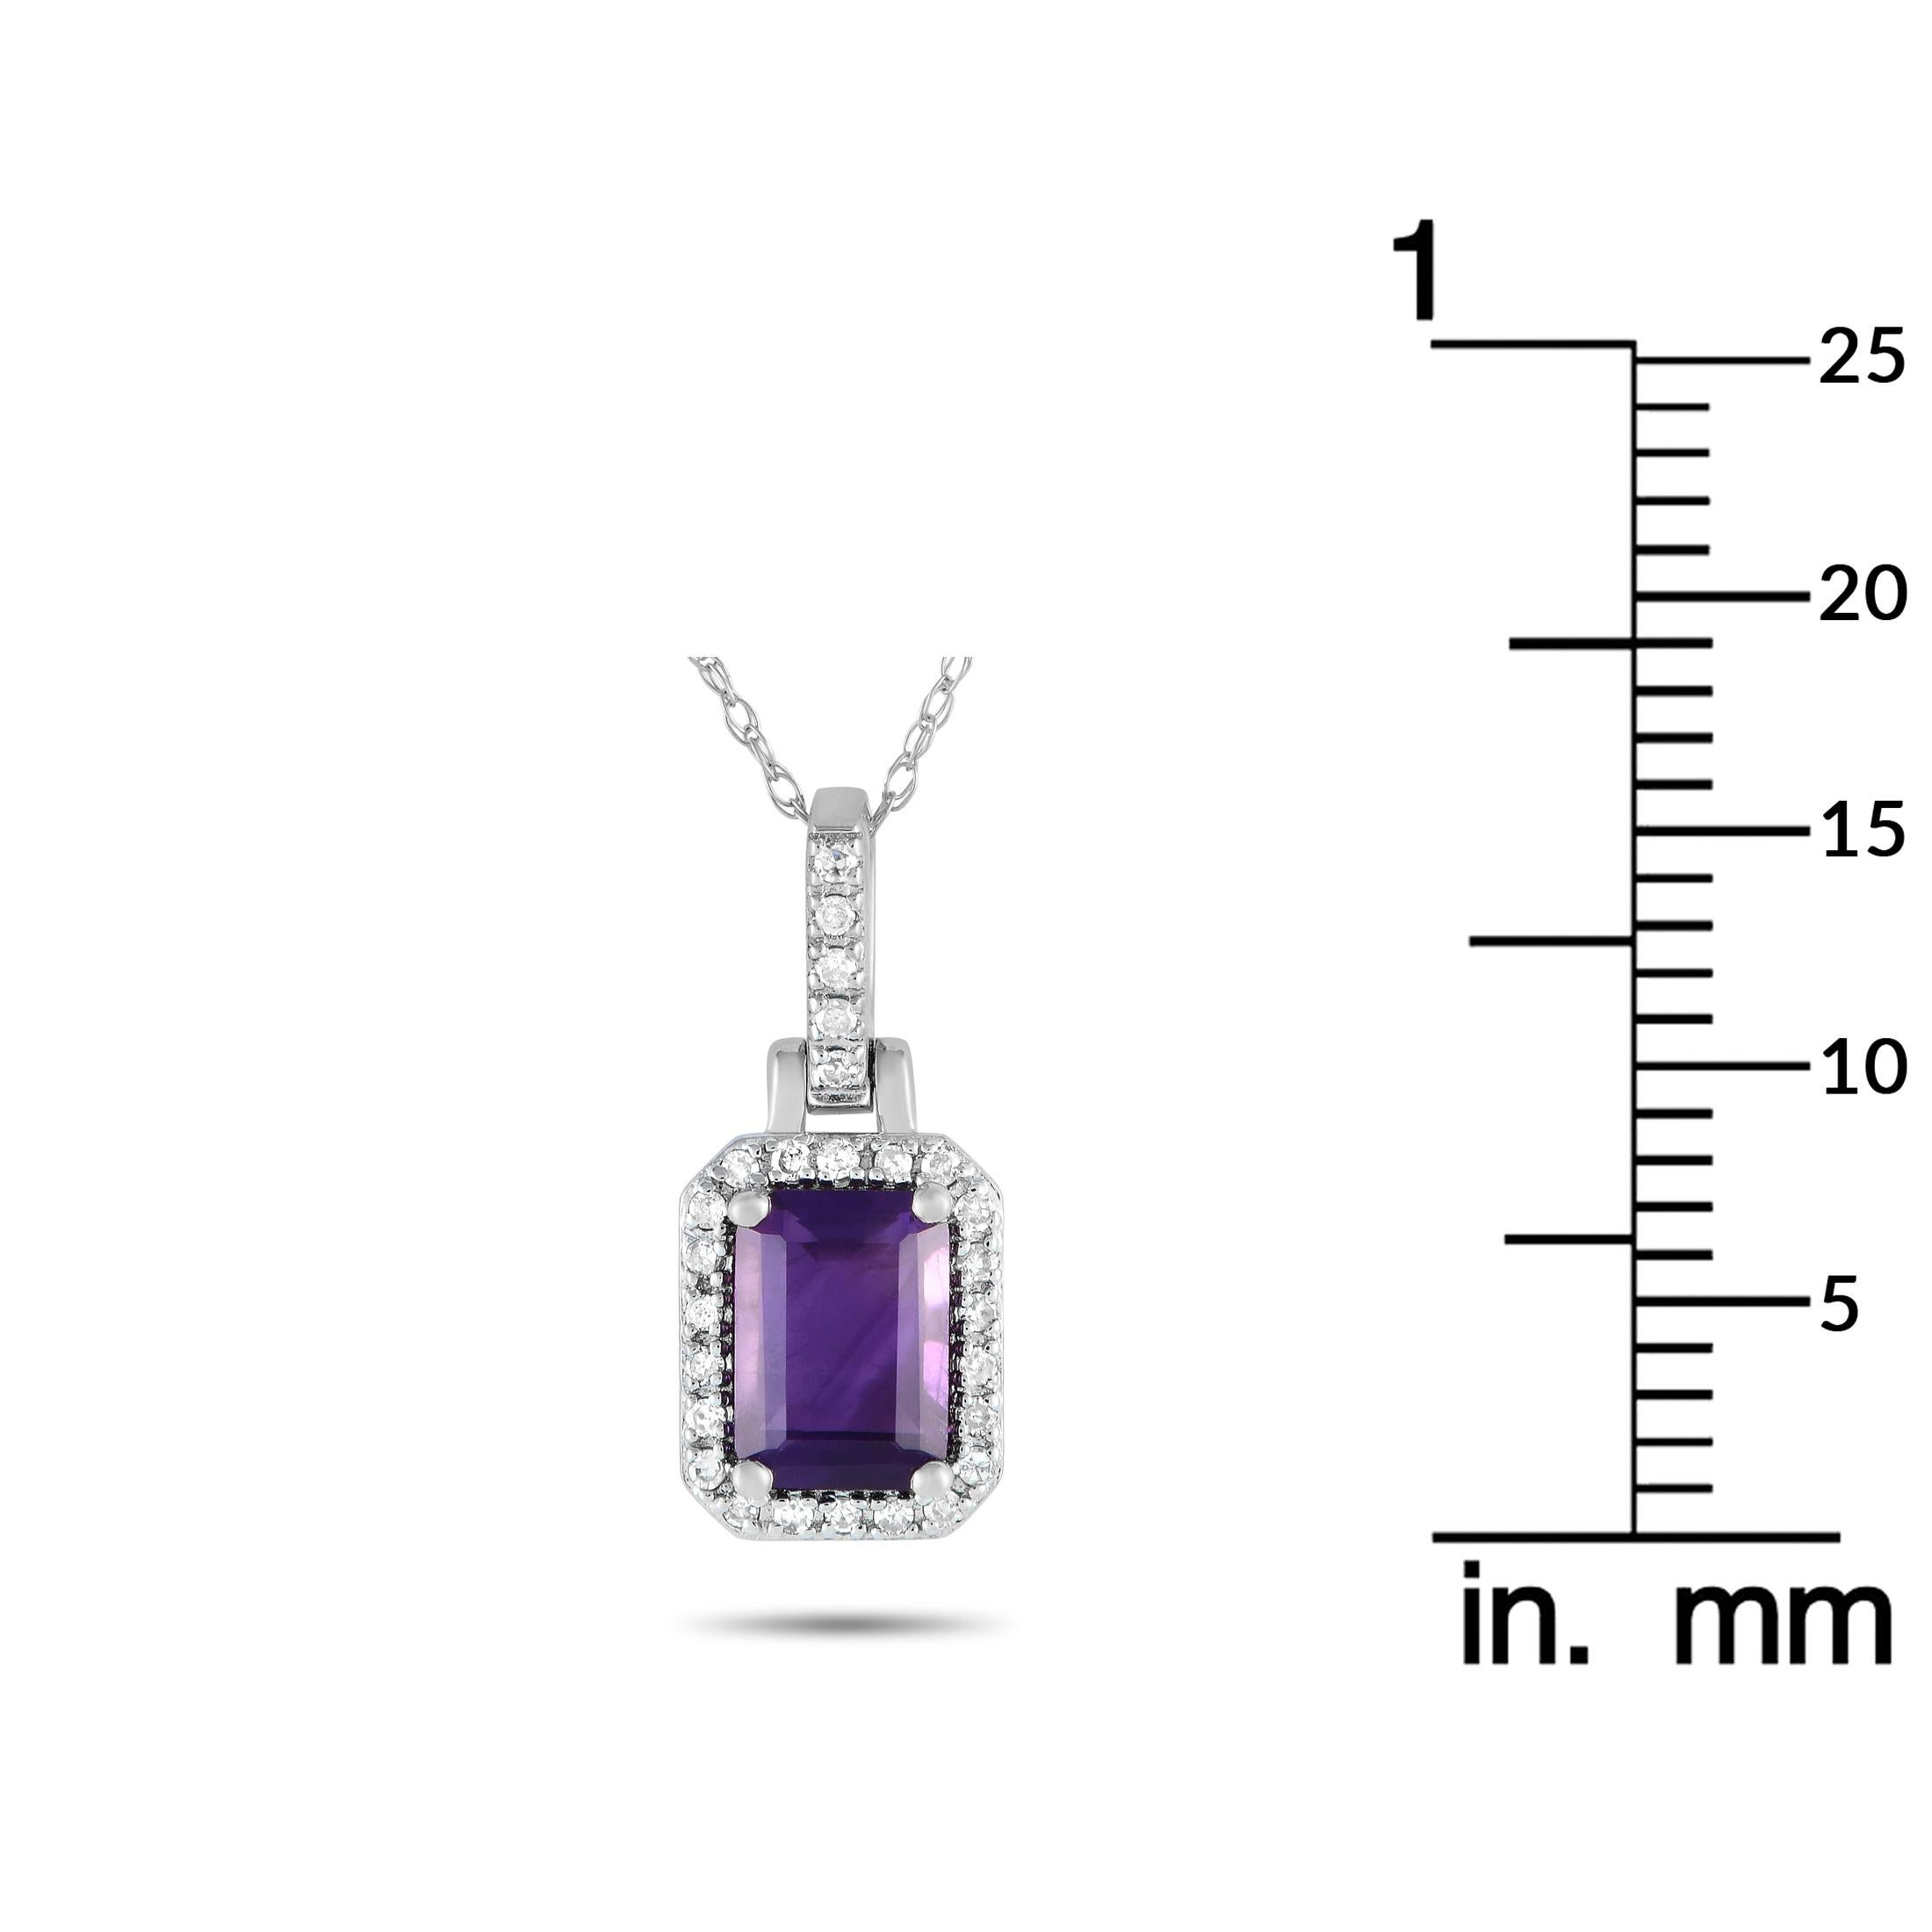 LB Exclusive 14K White Gold 0.12ct Diamond & Amethyst Necklace PD4-15501WAM In New Condition For Sale In Southampton, PA